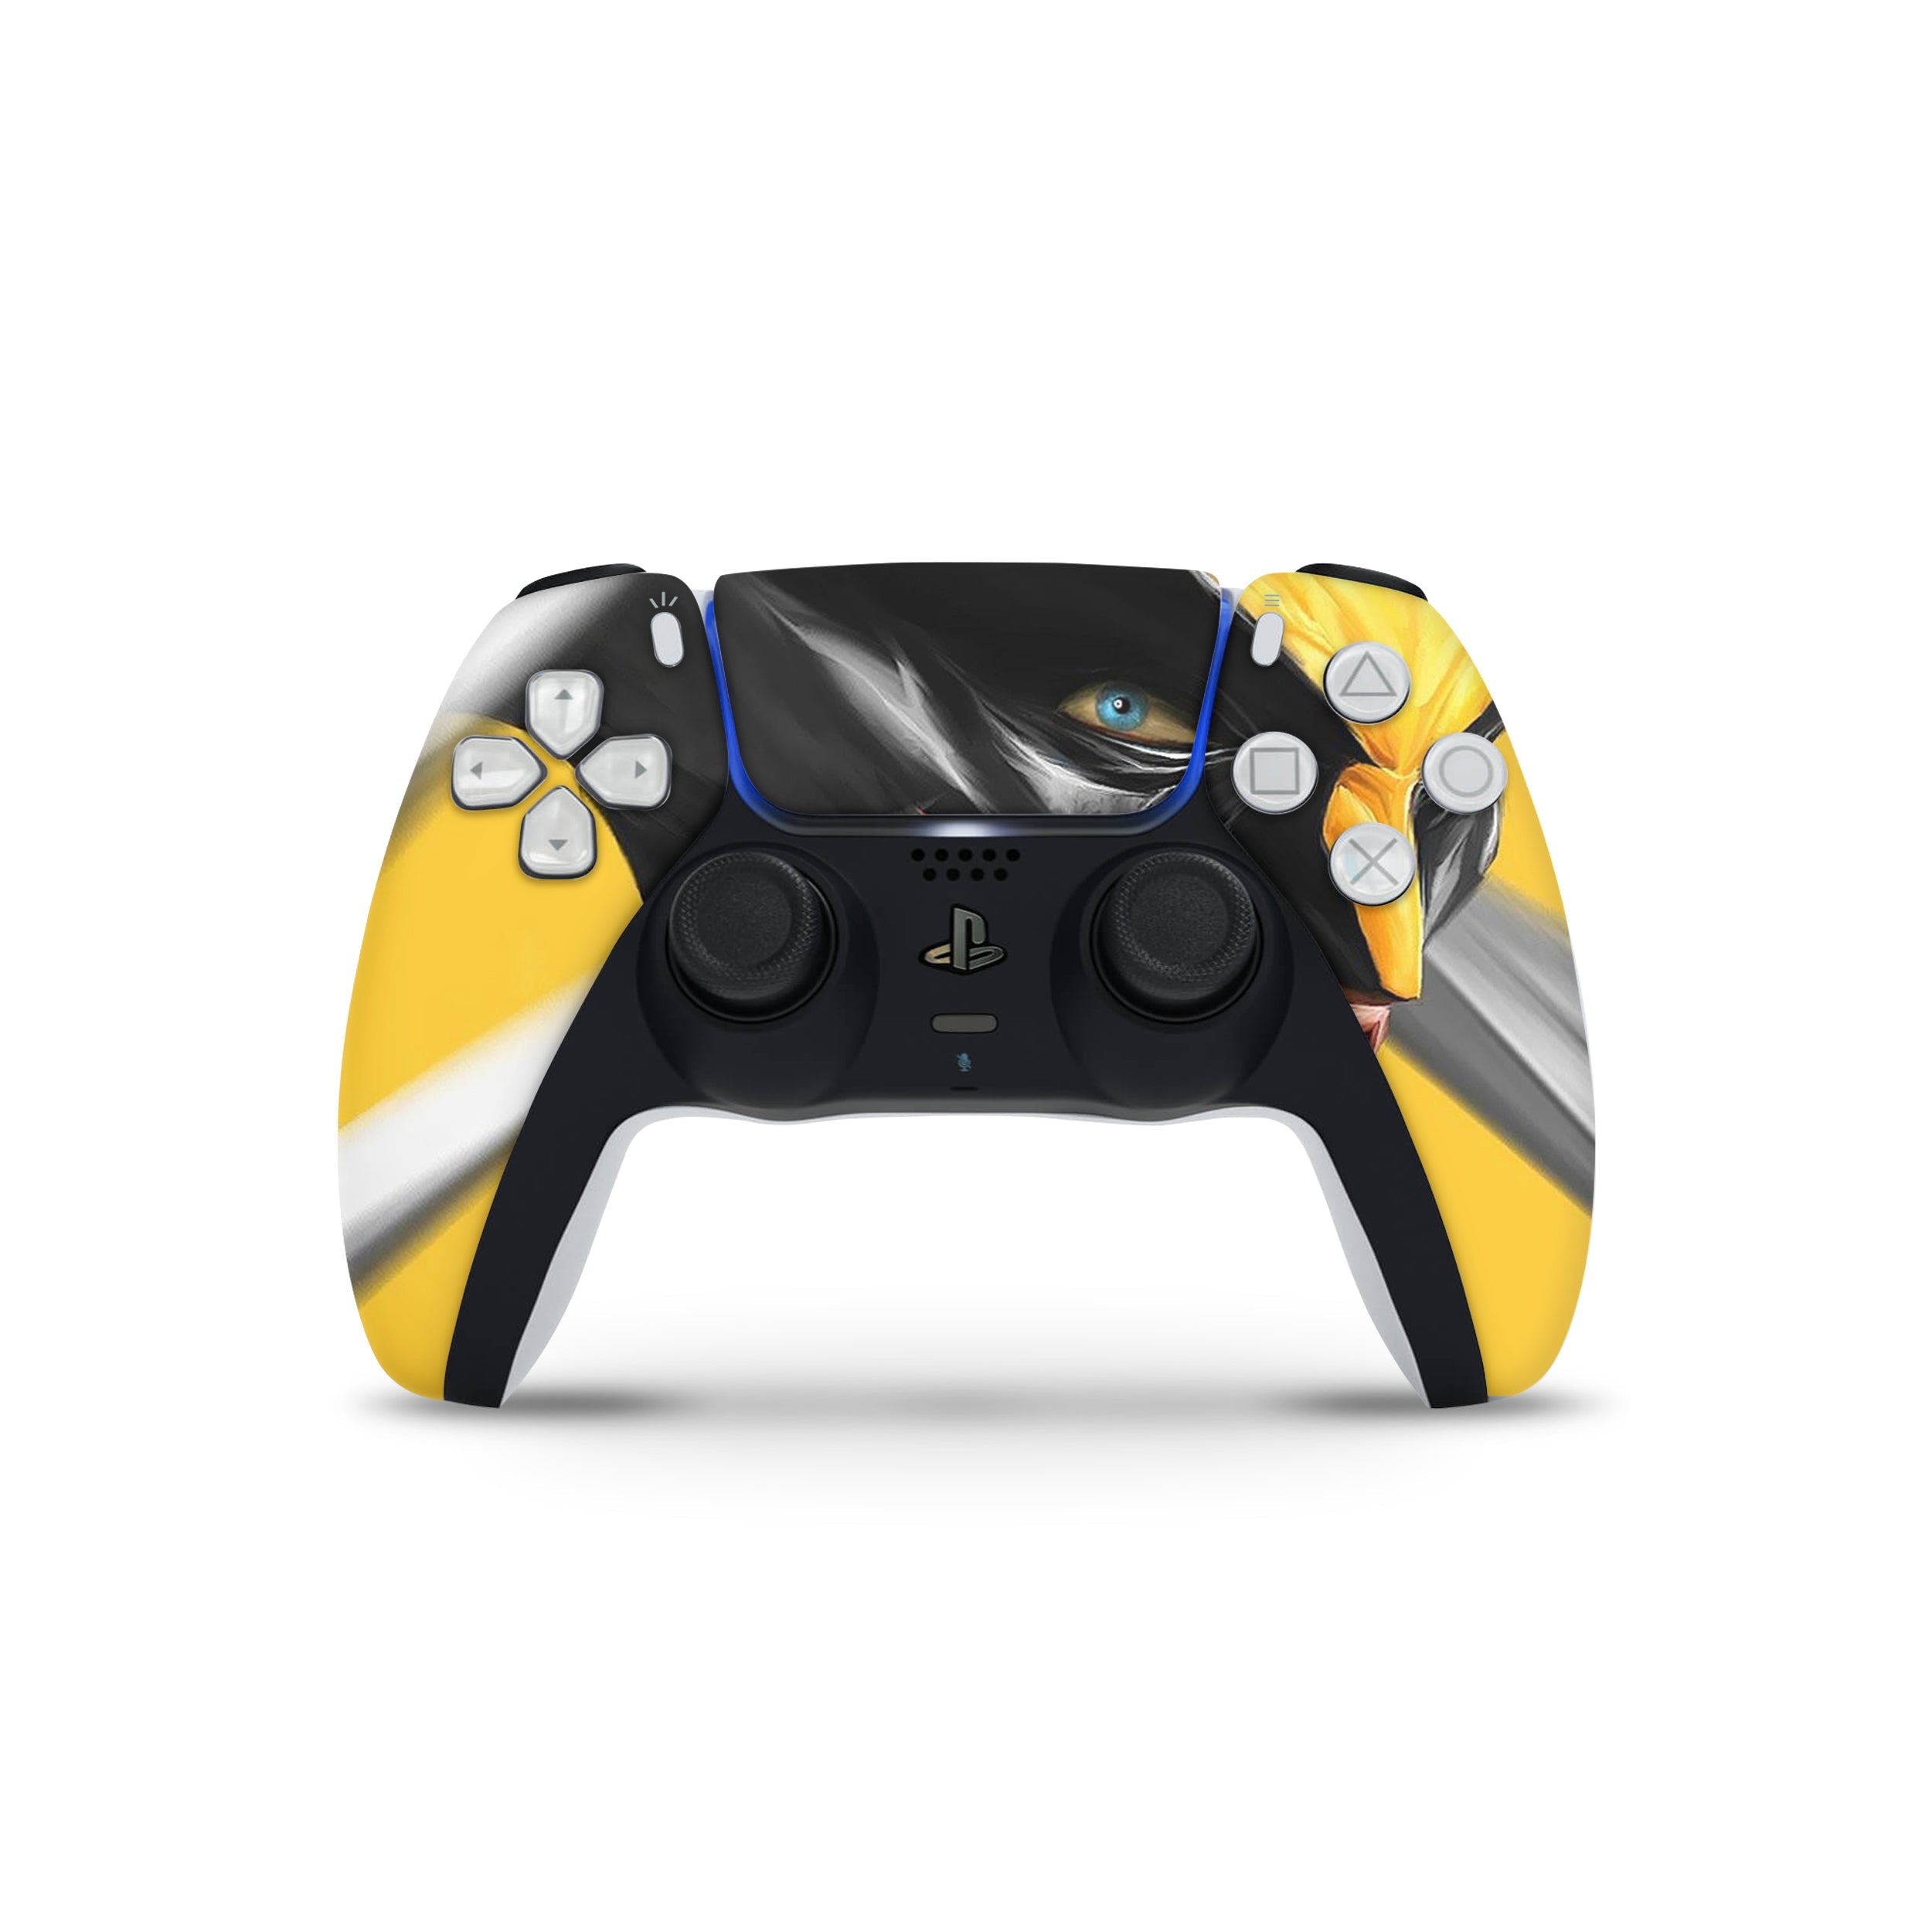 A video game skin featuring a Marvel X Men Wolverine design for the PS5 DualSense Controller.